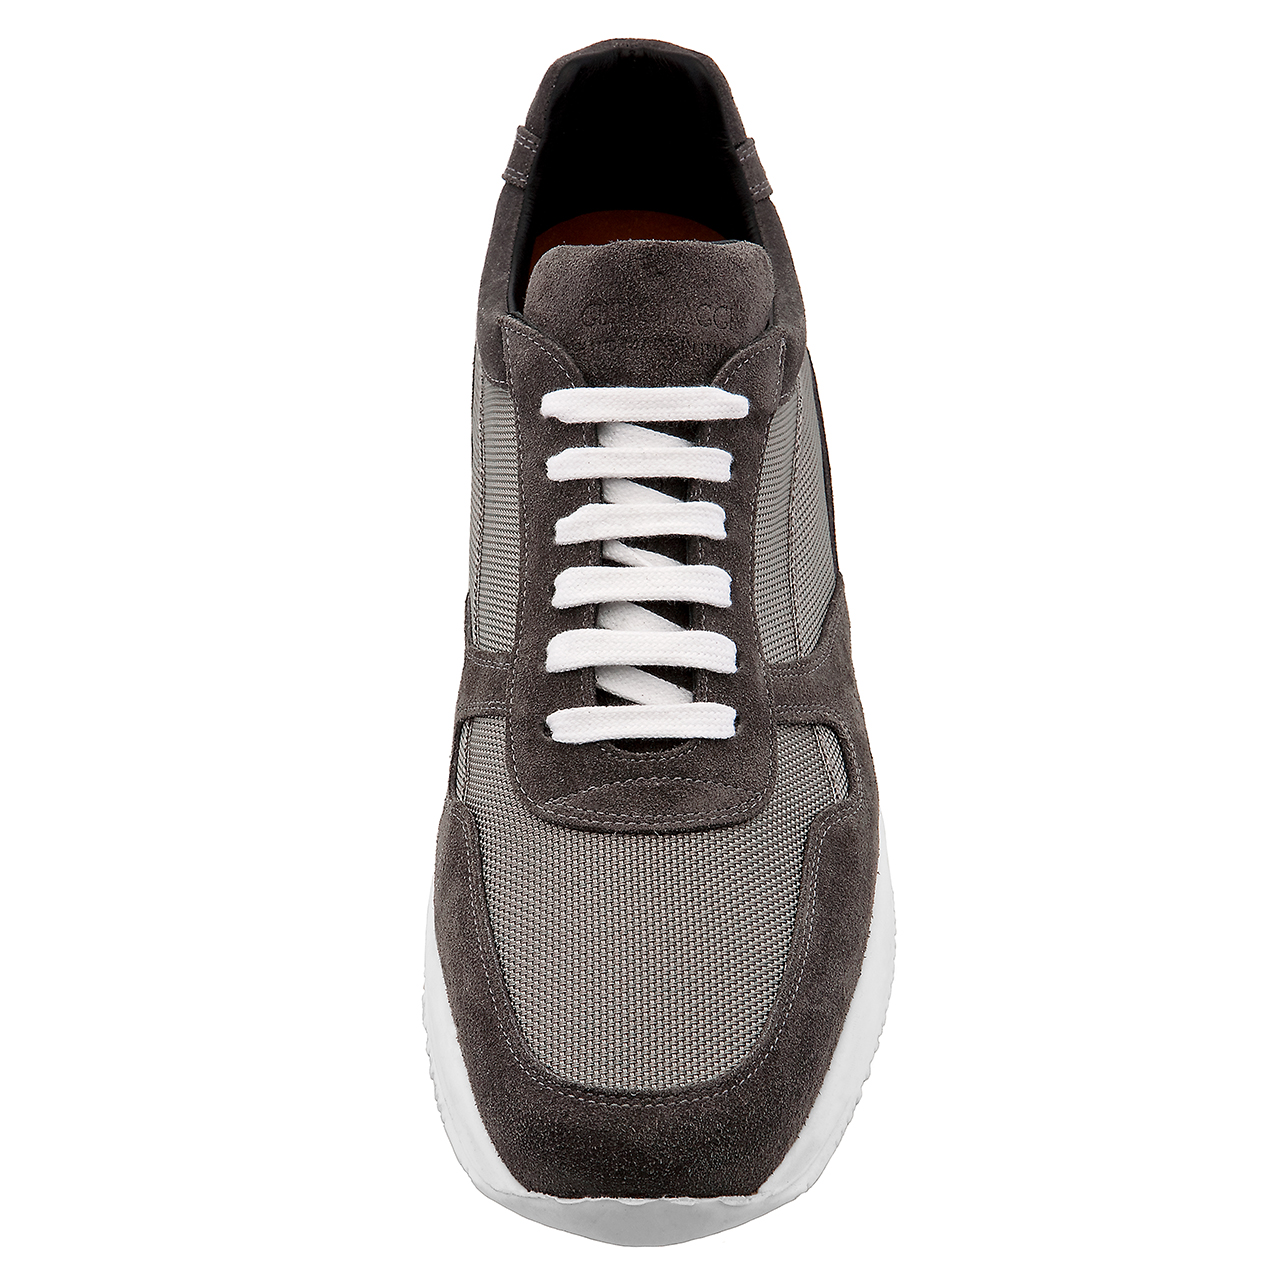 Luxury Elevator Sneakers | Guidomaggi Shoes